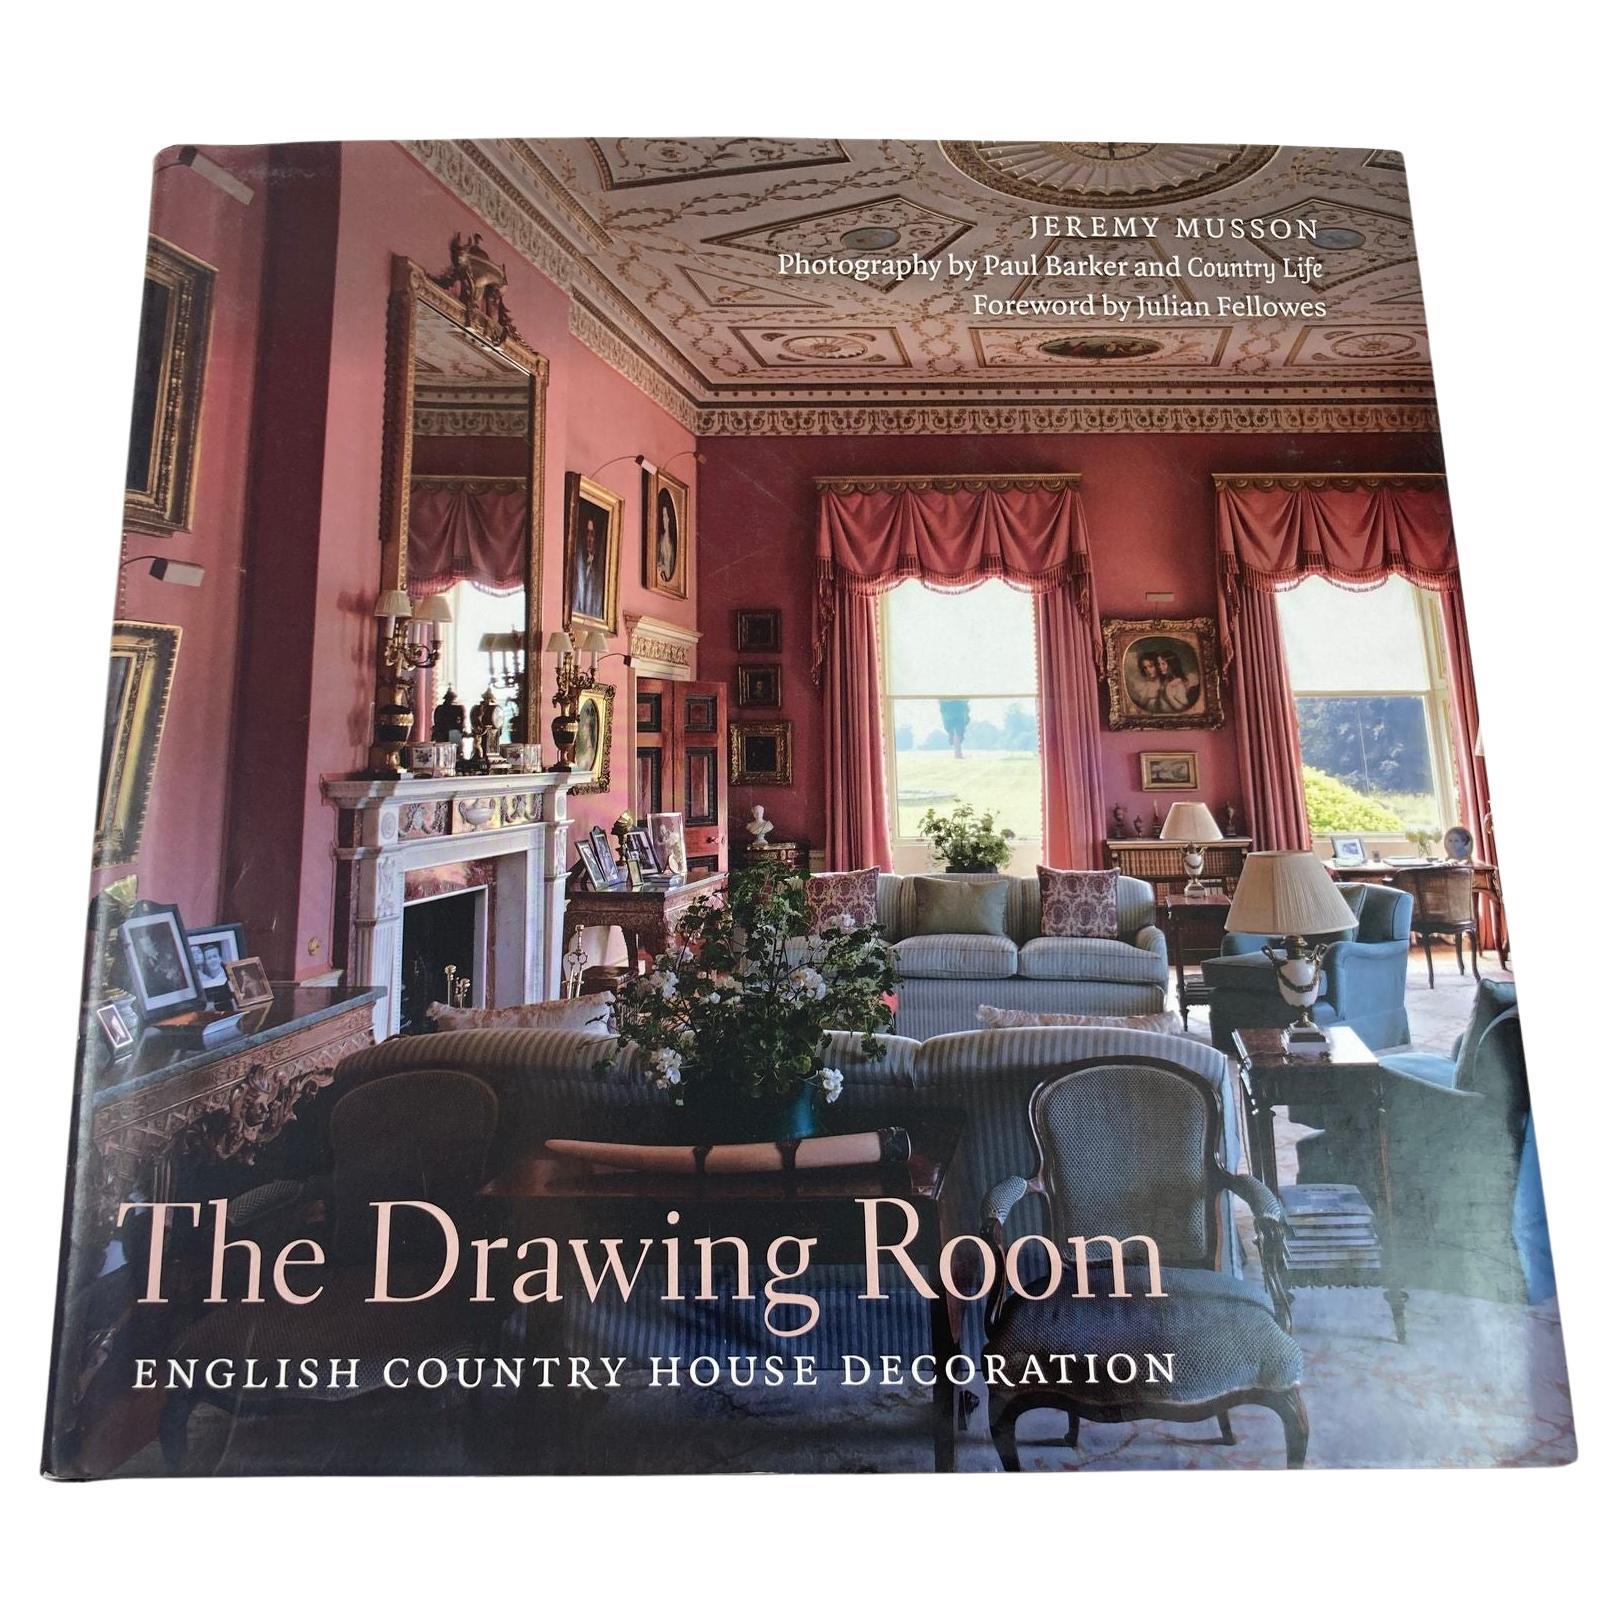 The Drawing Room English Country House Decoration by J Musson Hardcover Book For Sale